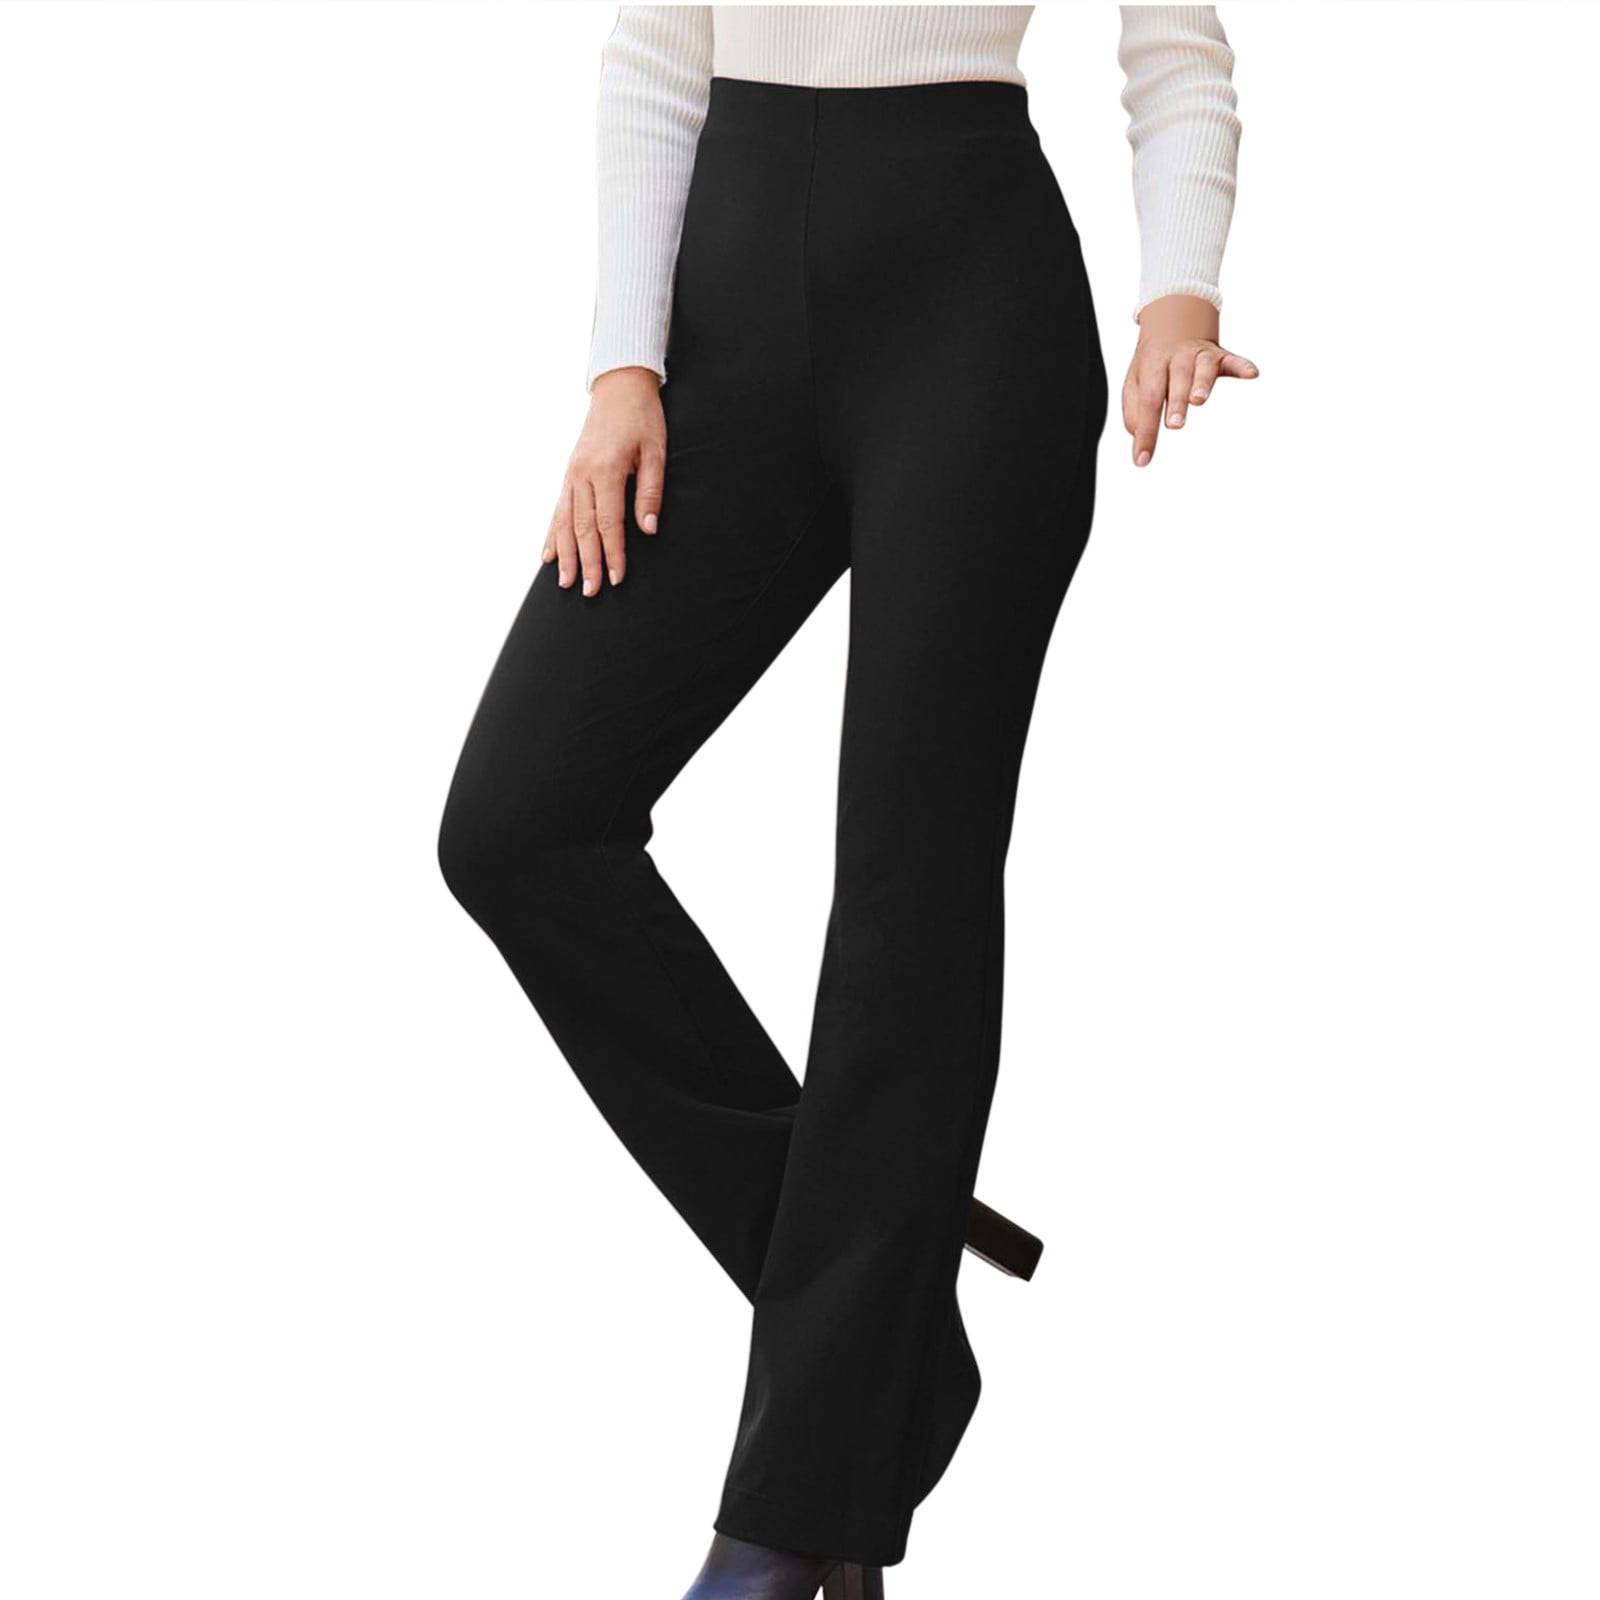 QUYUON Drawstring Pants Women Bell Bottoms Solid Suit Pants